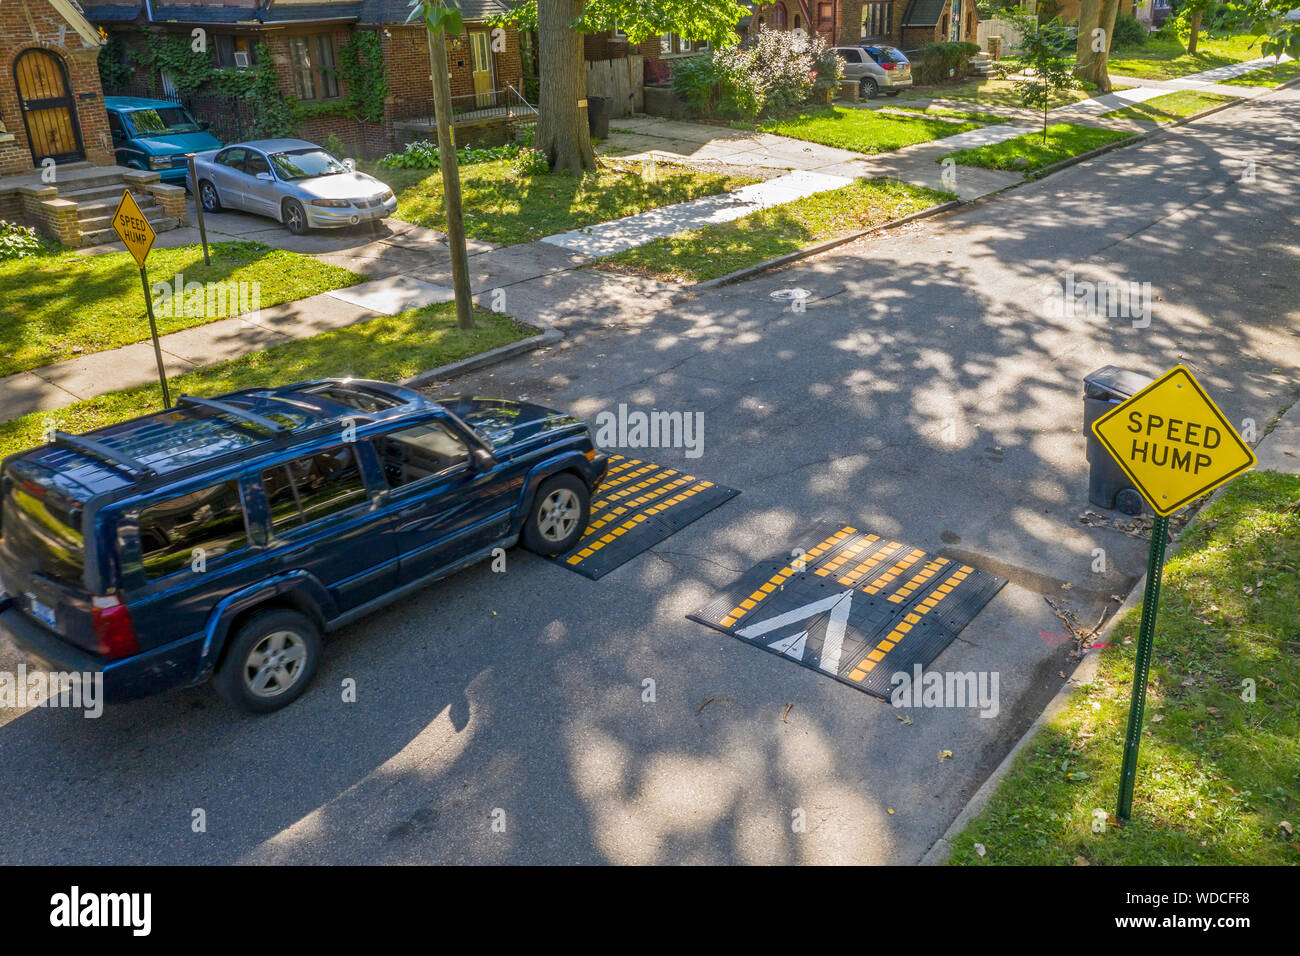 Detroit, Michigan - A car crosses a 'speed hump' in a residential neighborhood. The city has begun installing these devices on streets where speeding Stock Photo